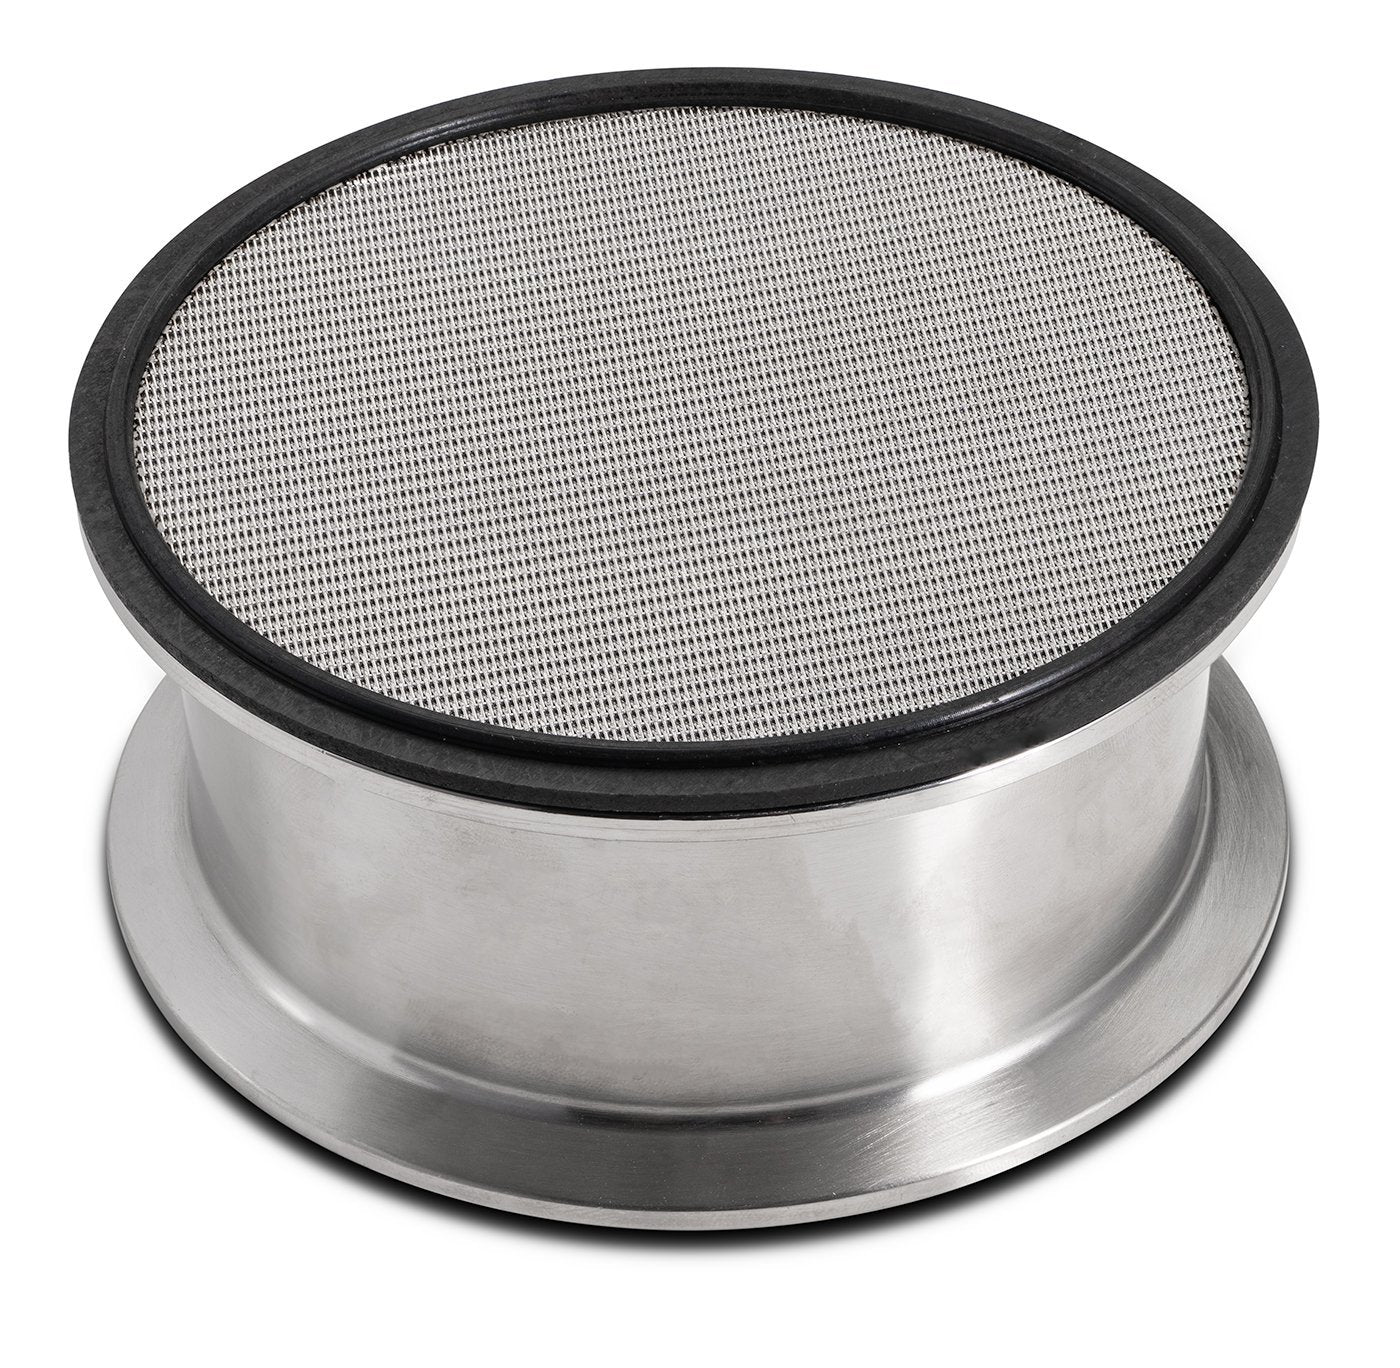 316L Stainless Dutch Weave Sintered Filter Disk 1 micron and up Shop All Categories BVV 